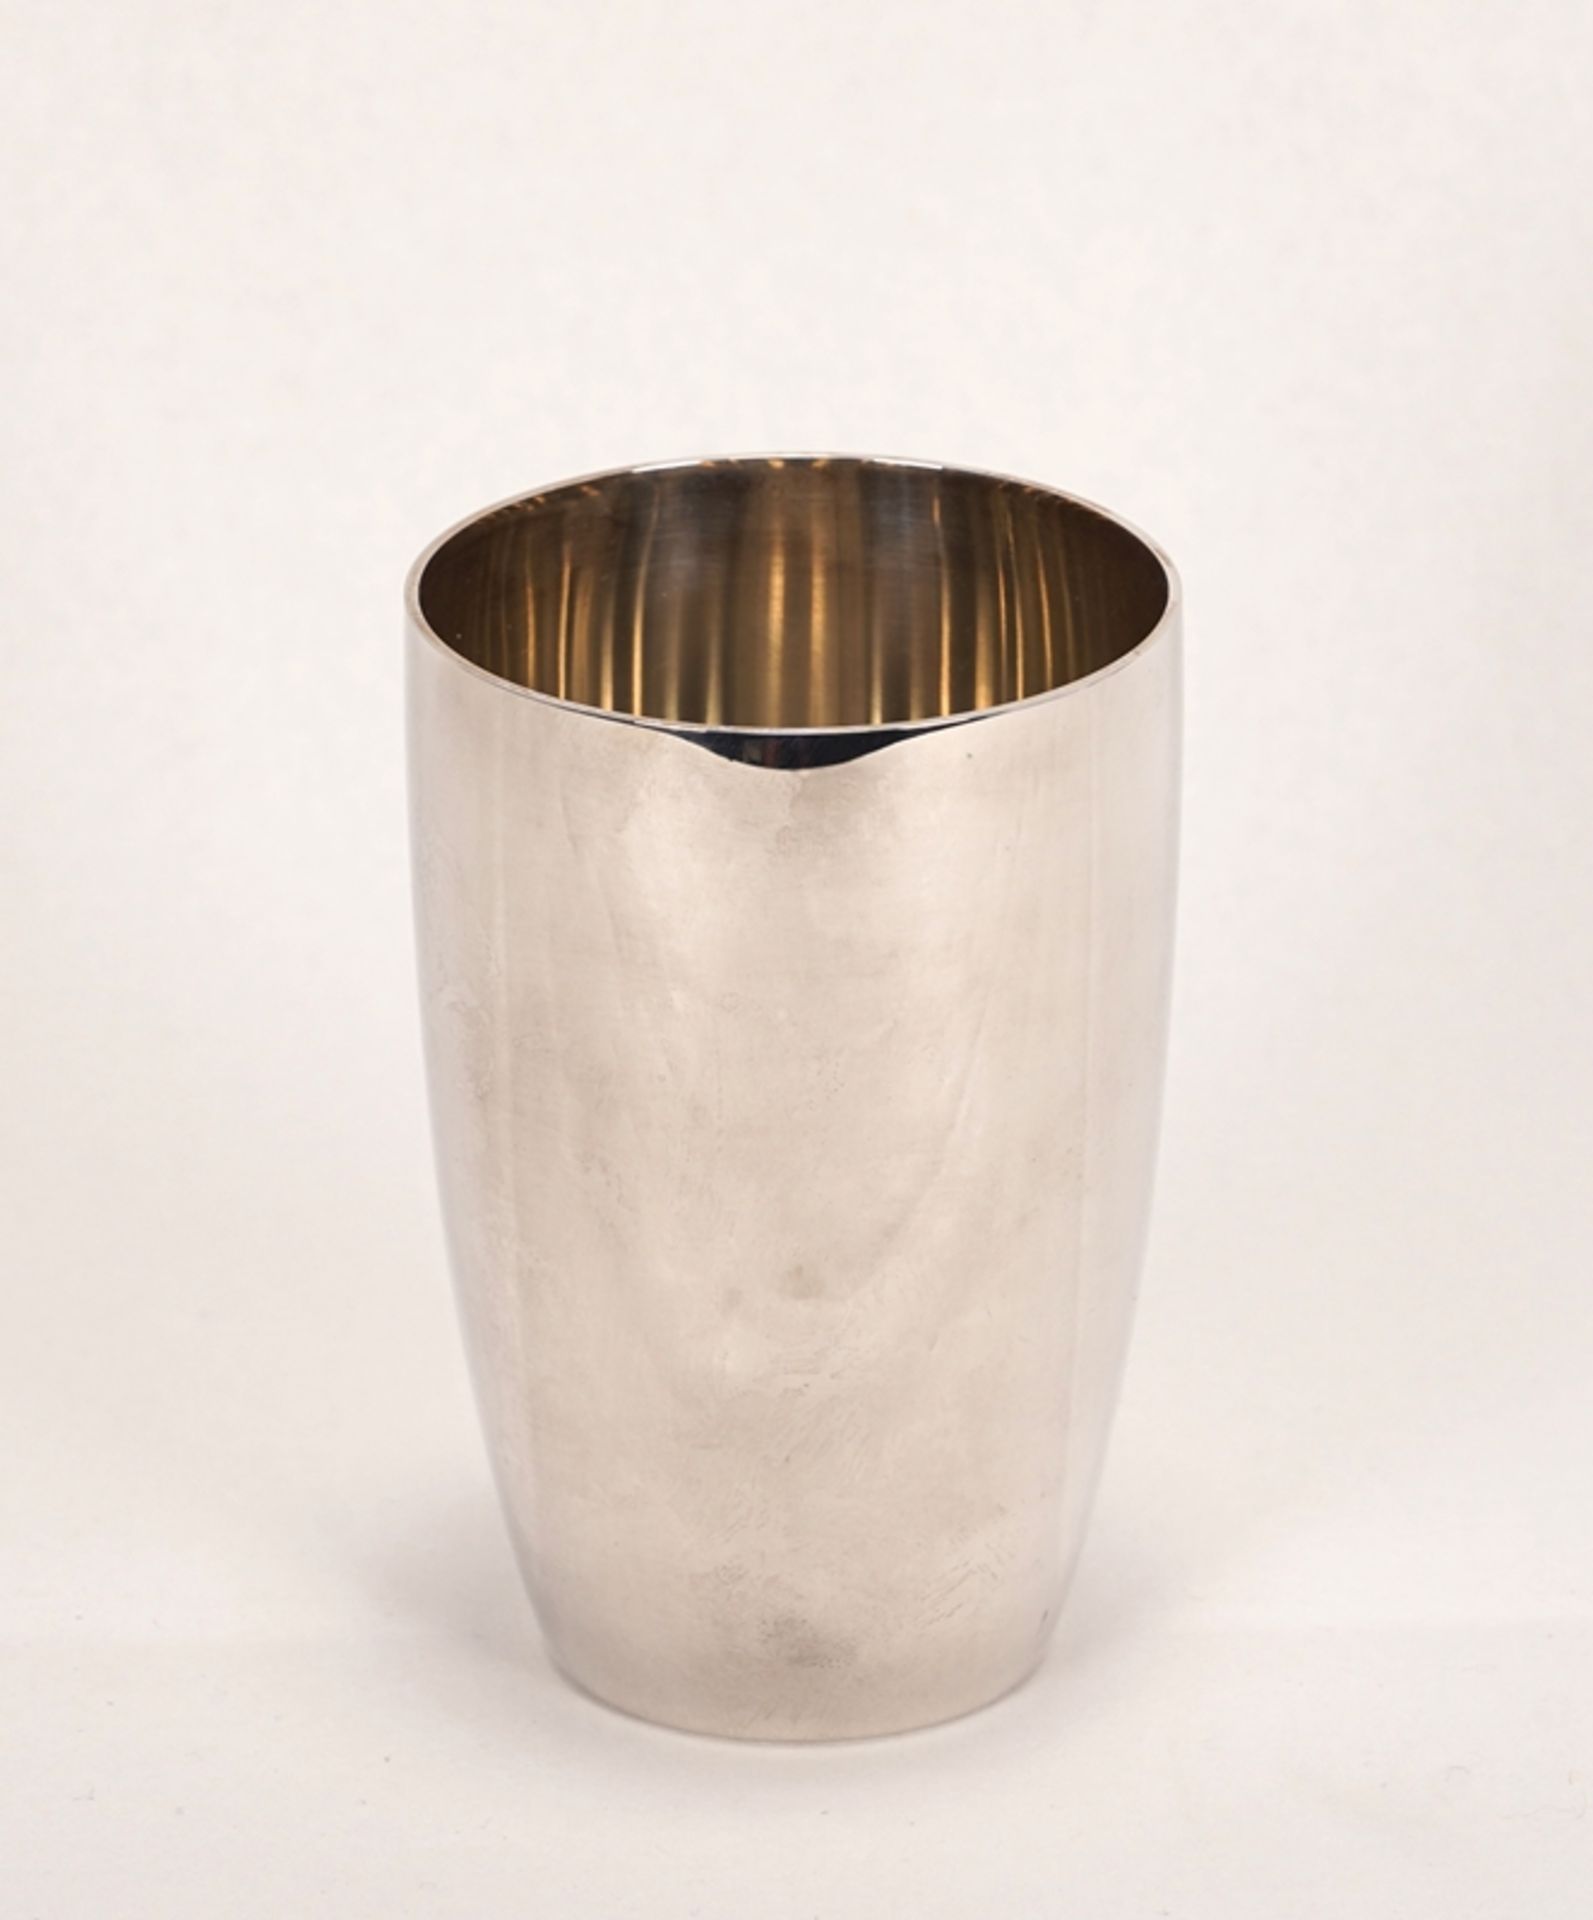 Silberbecher | Silver cup - Image 2 of 3